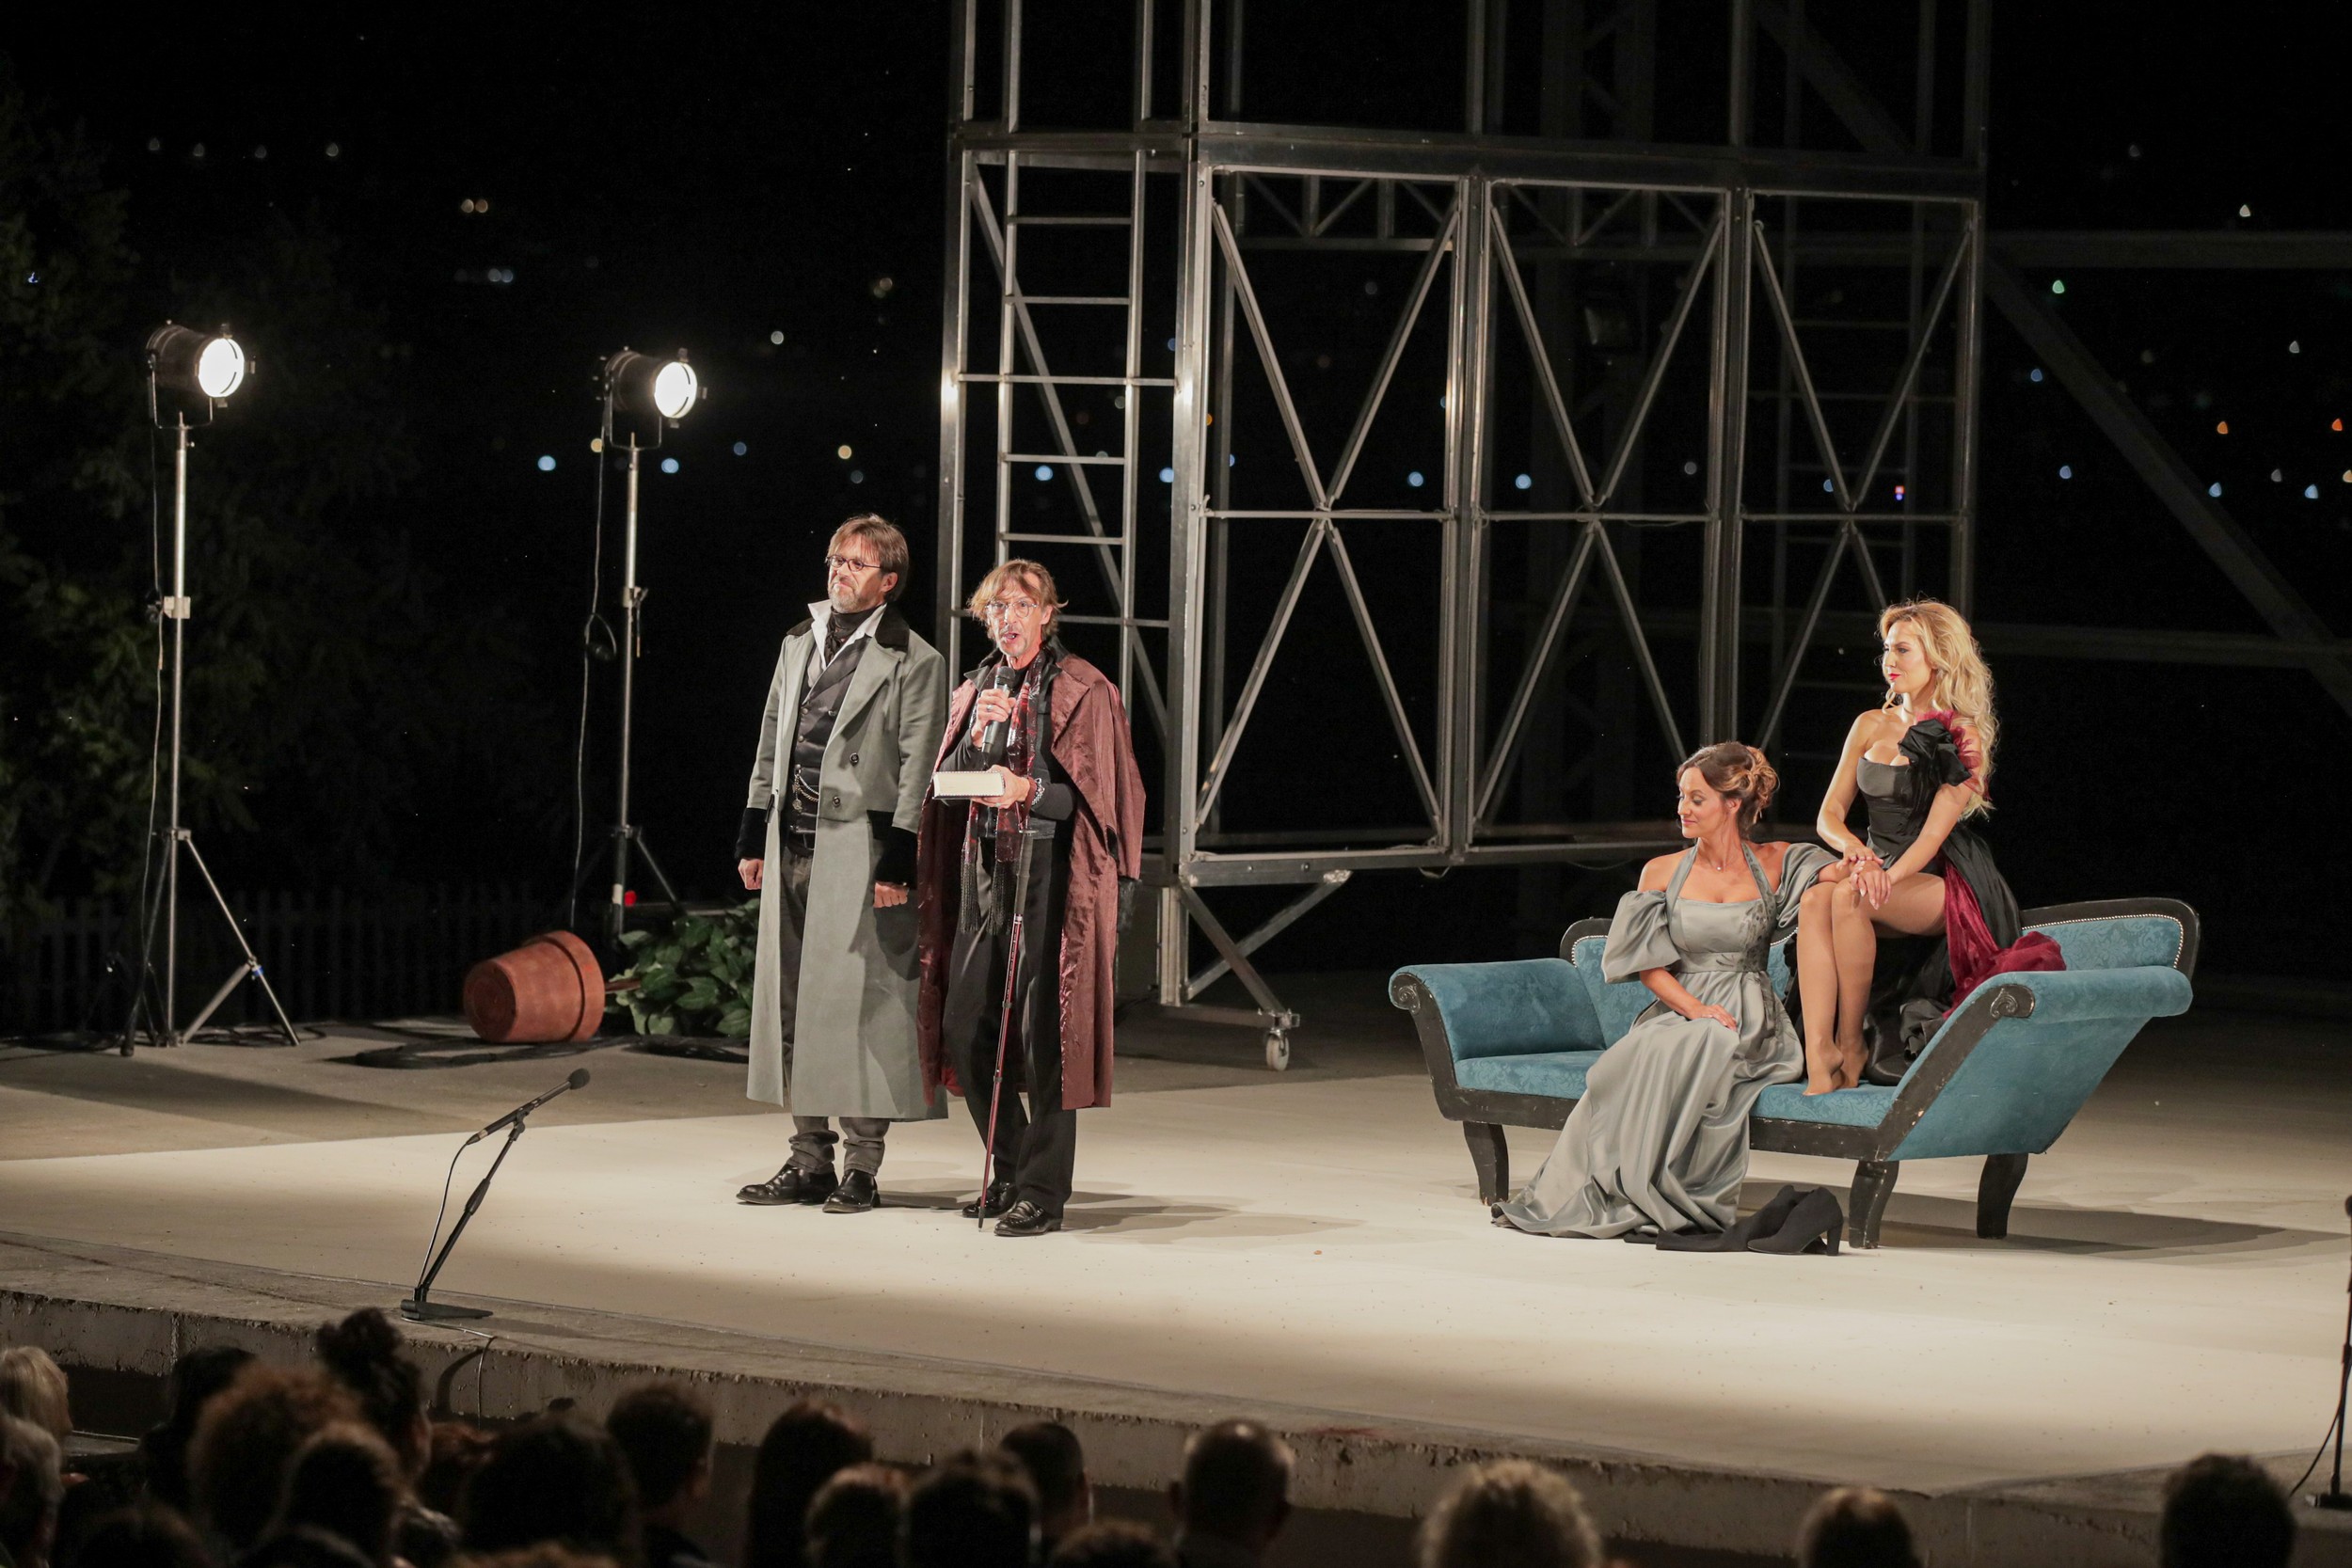 Master performance of “War and peace” with the actors from the National theatre in Belgrade